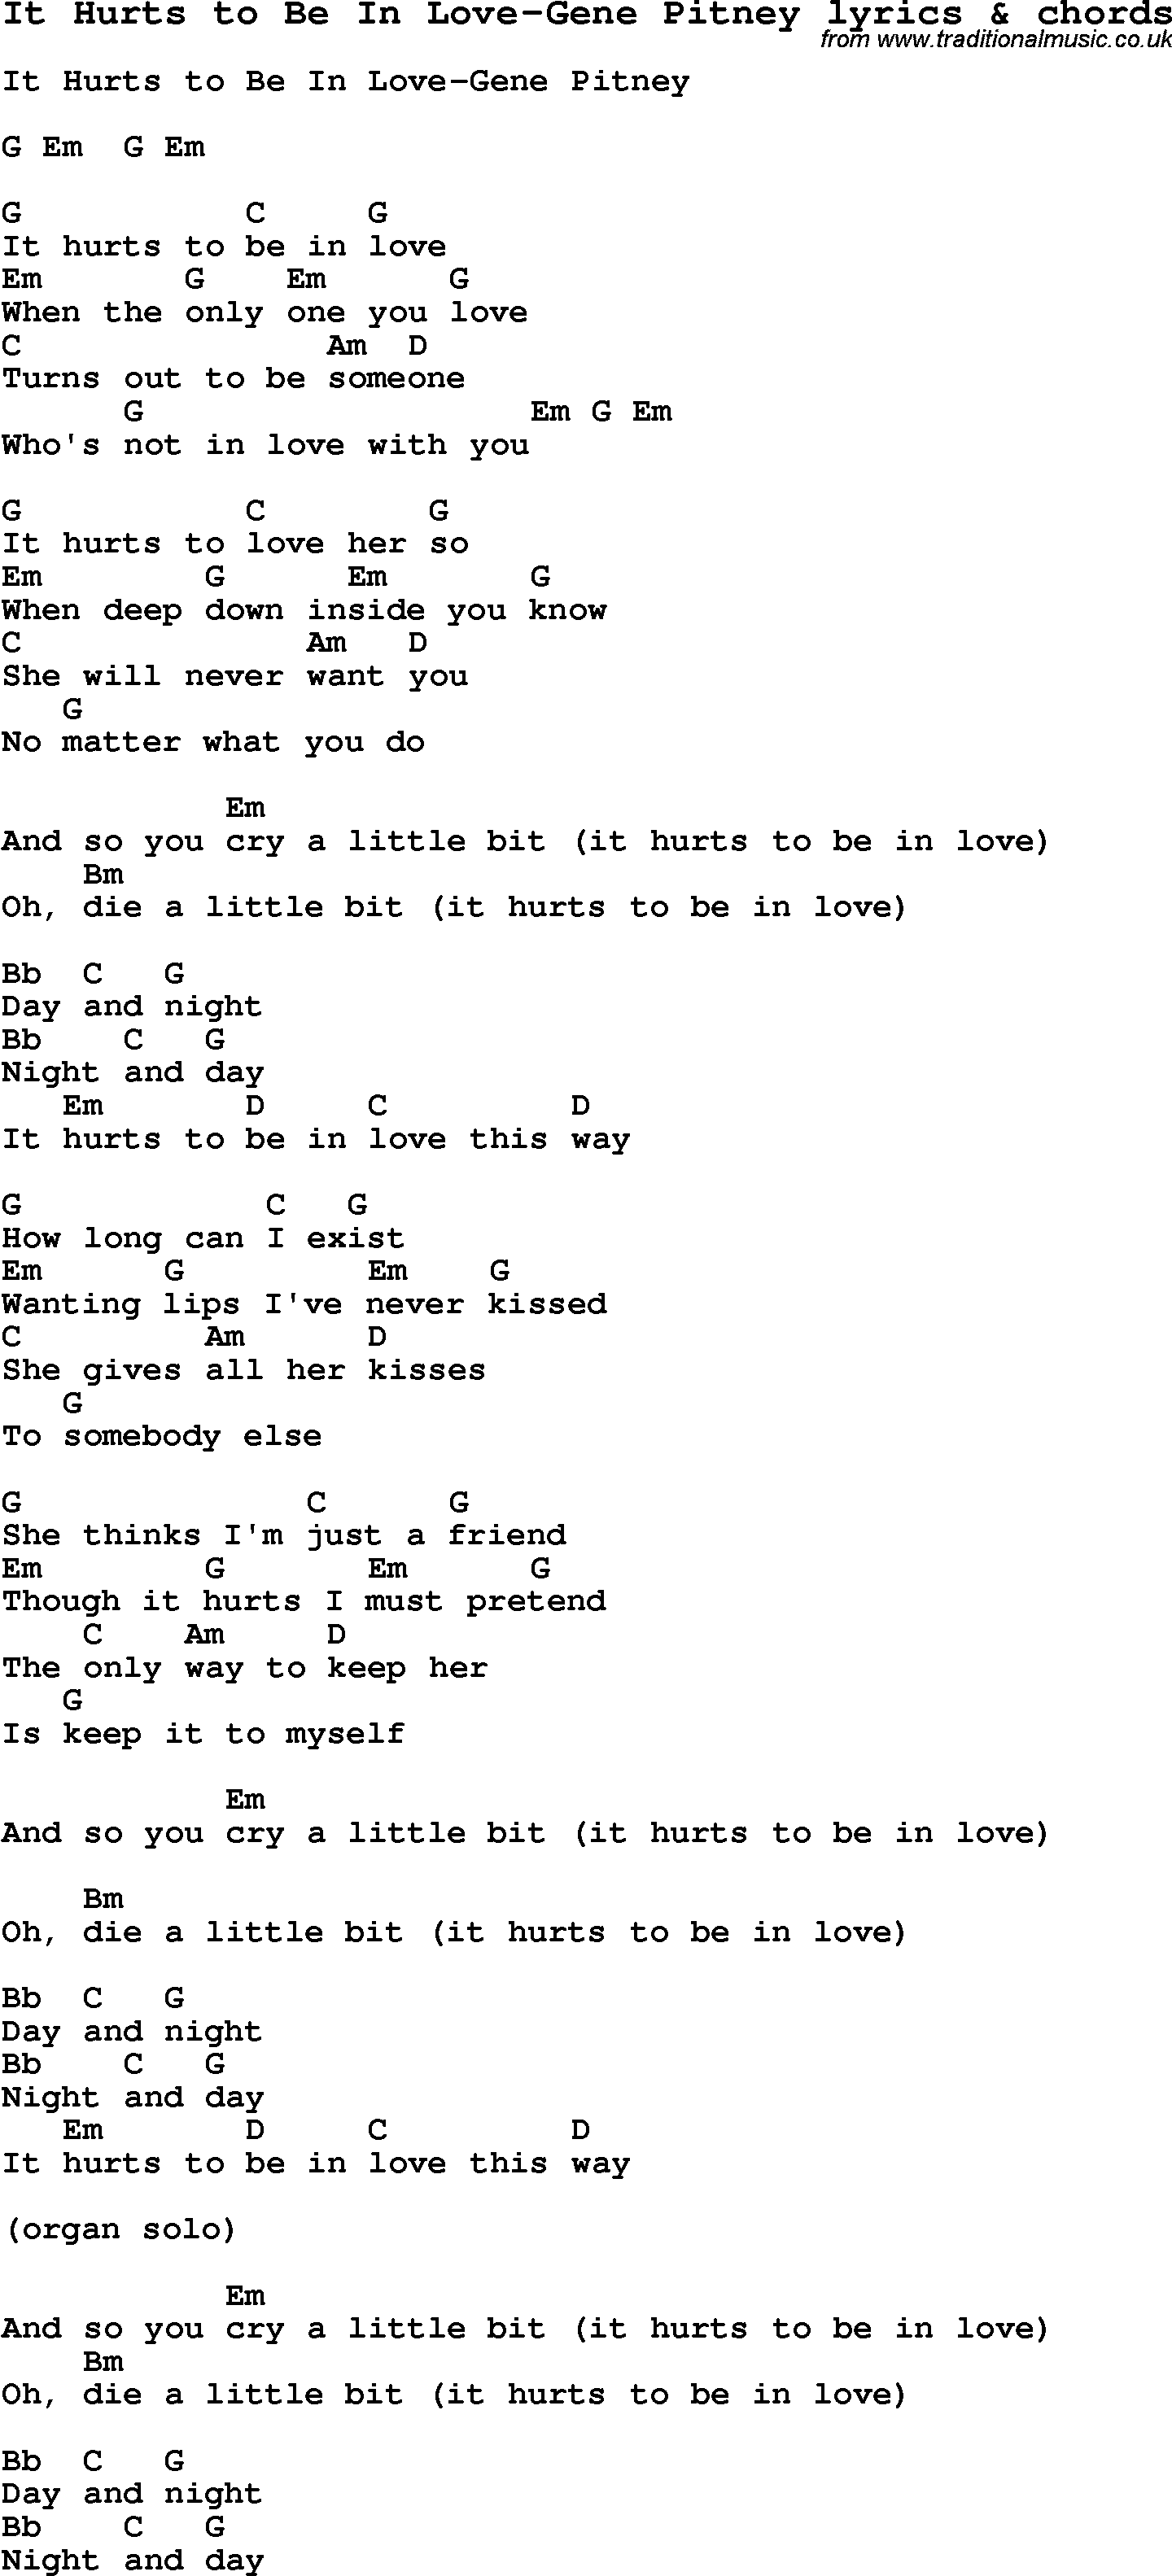 Love Song Lyrics for: It Hurts to Be In Love-Gene Pitney with chords for Ukulele, Guitar Banjo etc.